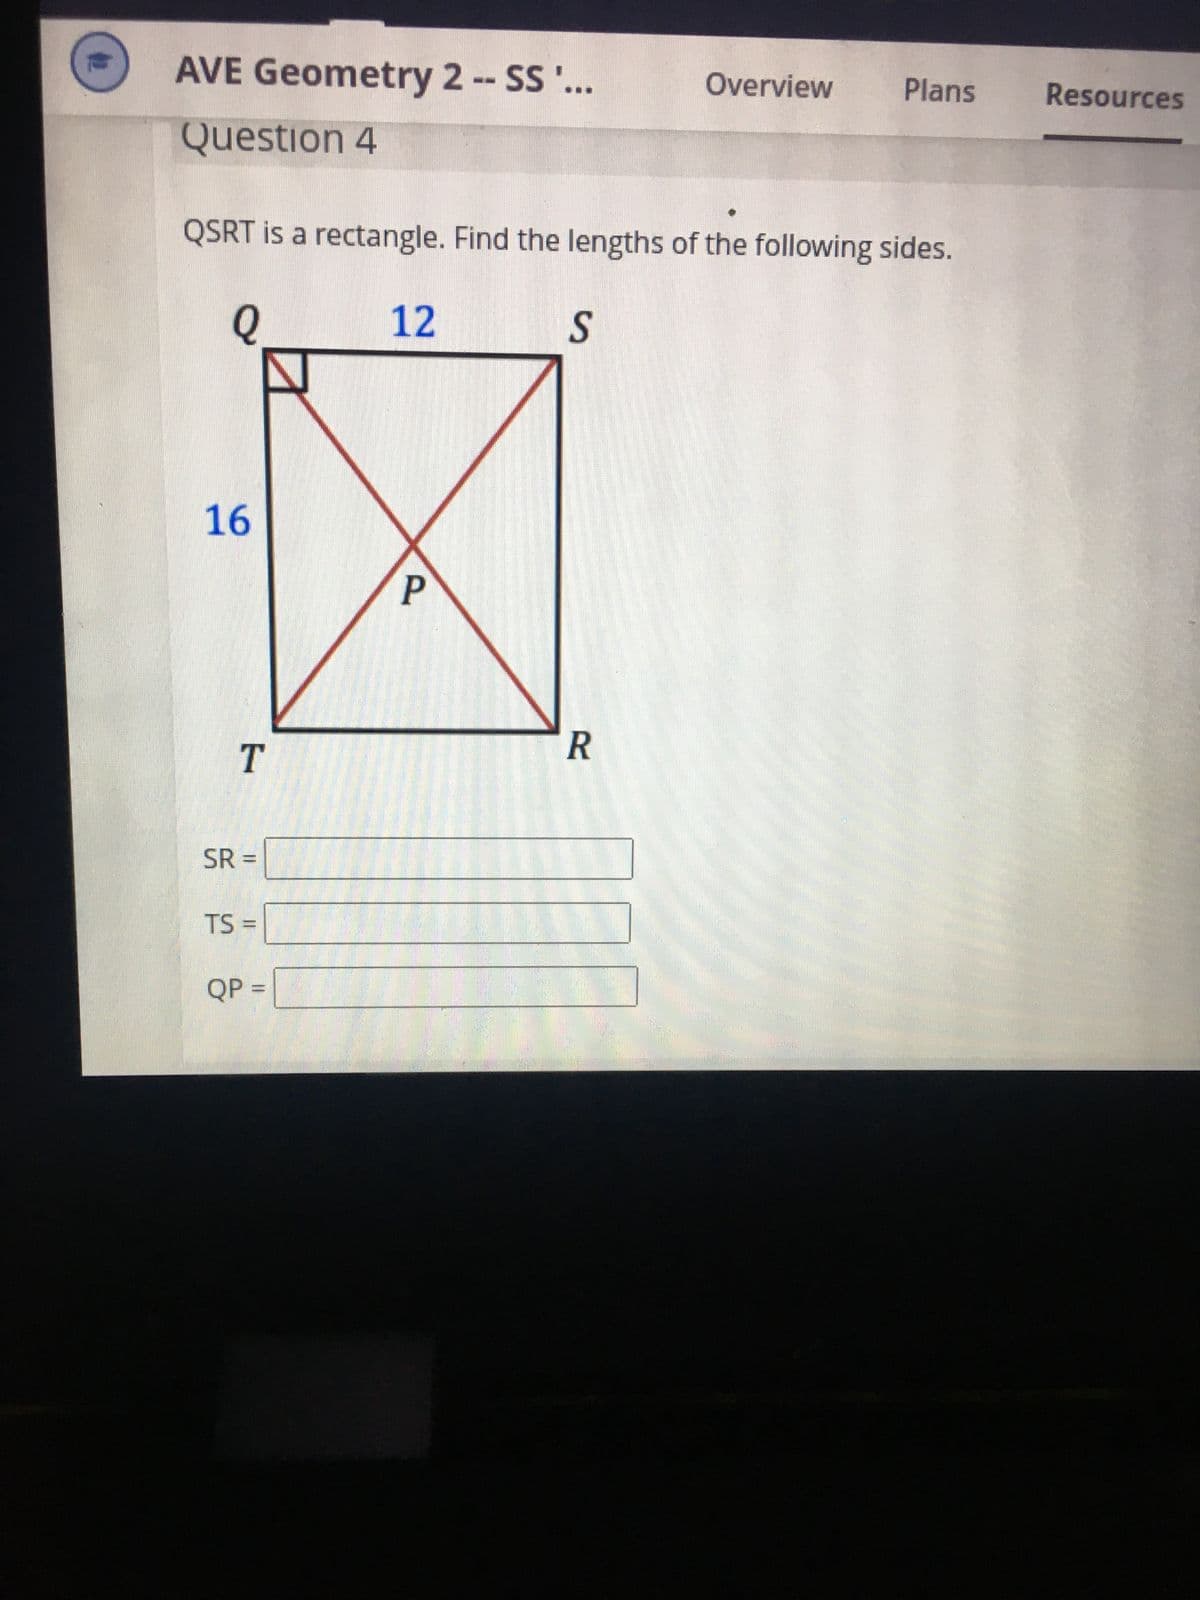 #2
AVE Geometry 2 -- SS '...
Question 4
Q
QSRT is a rectangle. Find the lengths of the following sides.
12
16
T
SR =
TS=
QP =
P
S
Overview
R
Plans
Resources